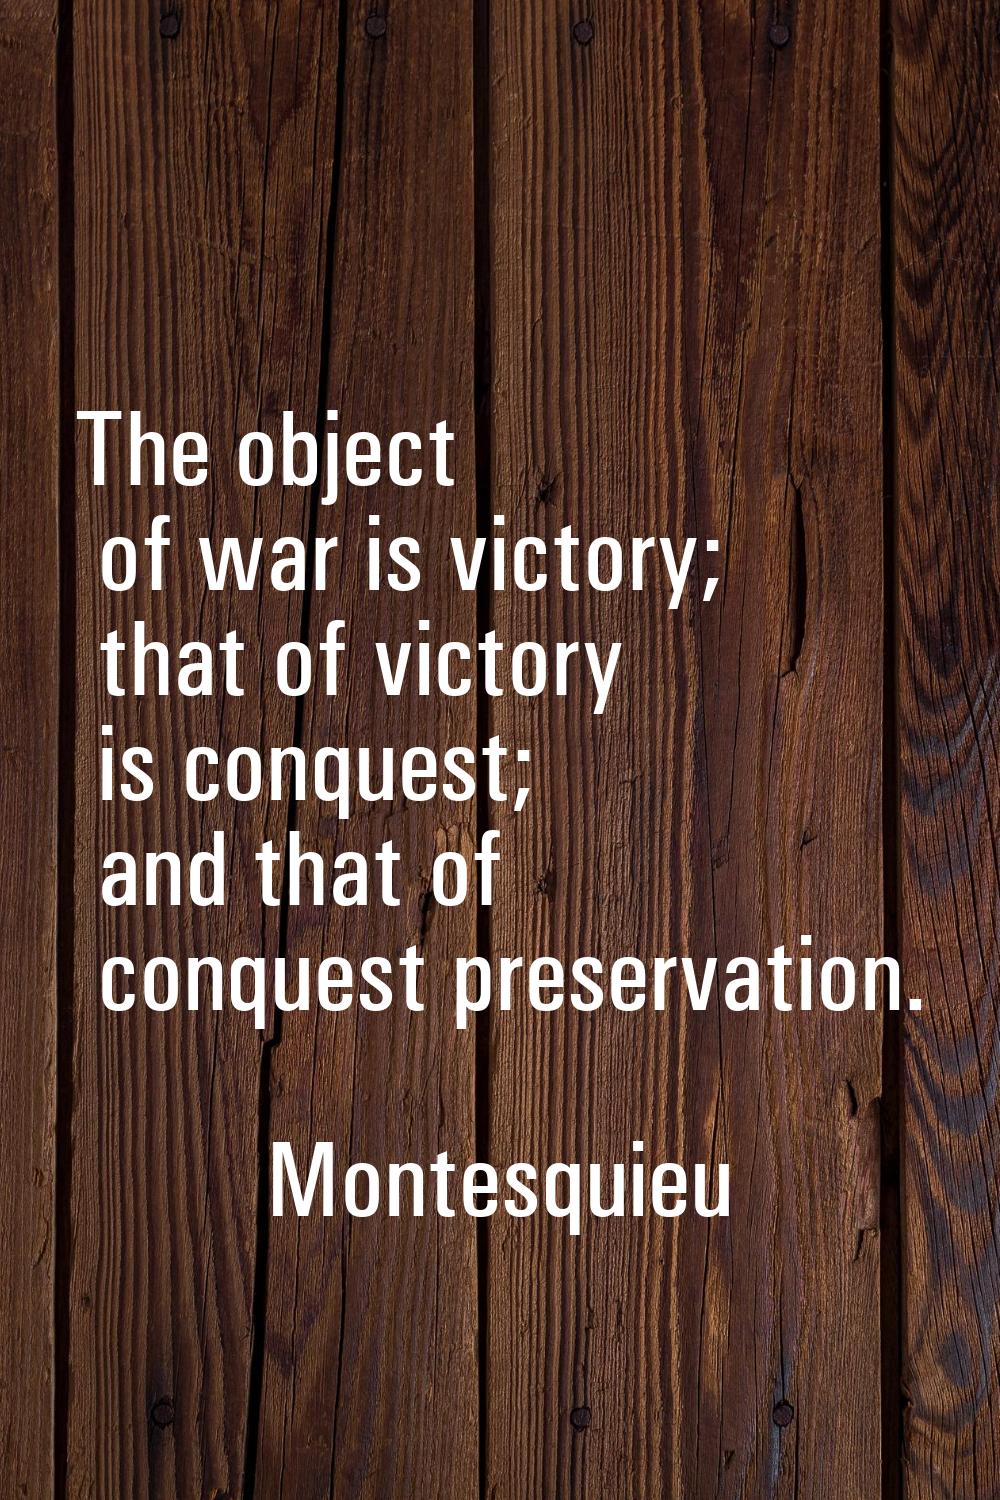 The object of war is victory; that of victory is conquest; and that of conquest preservation.